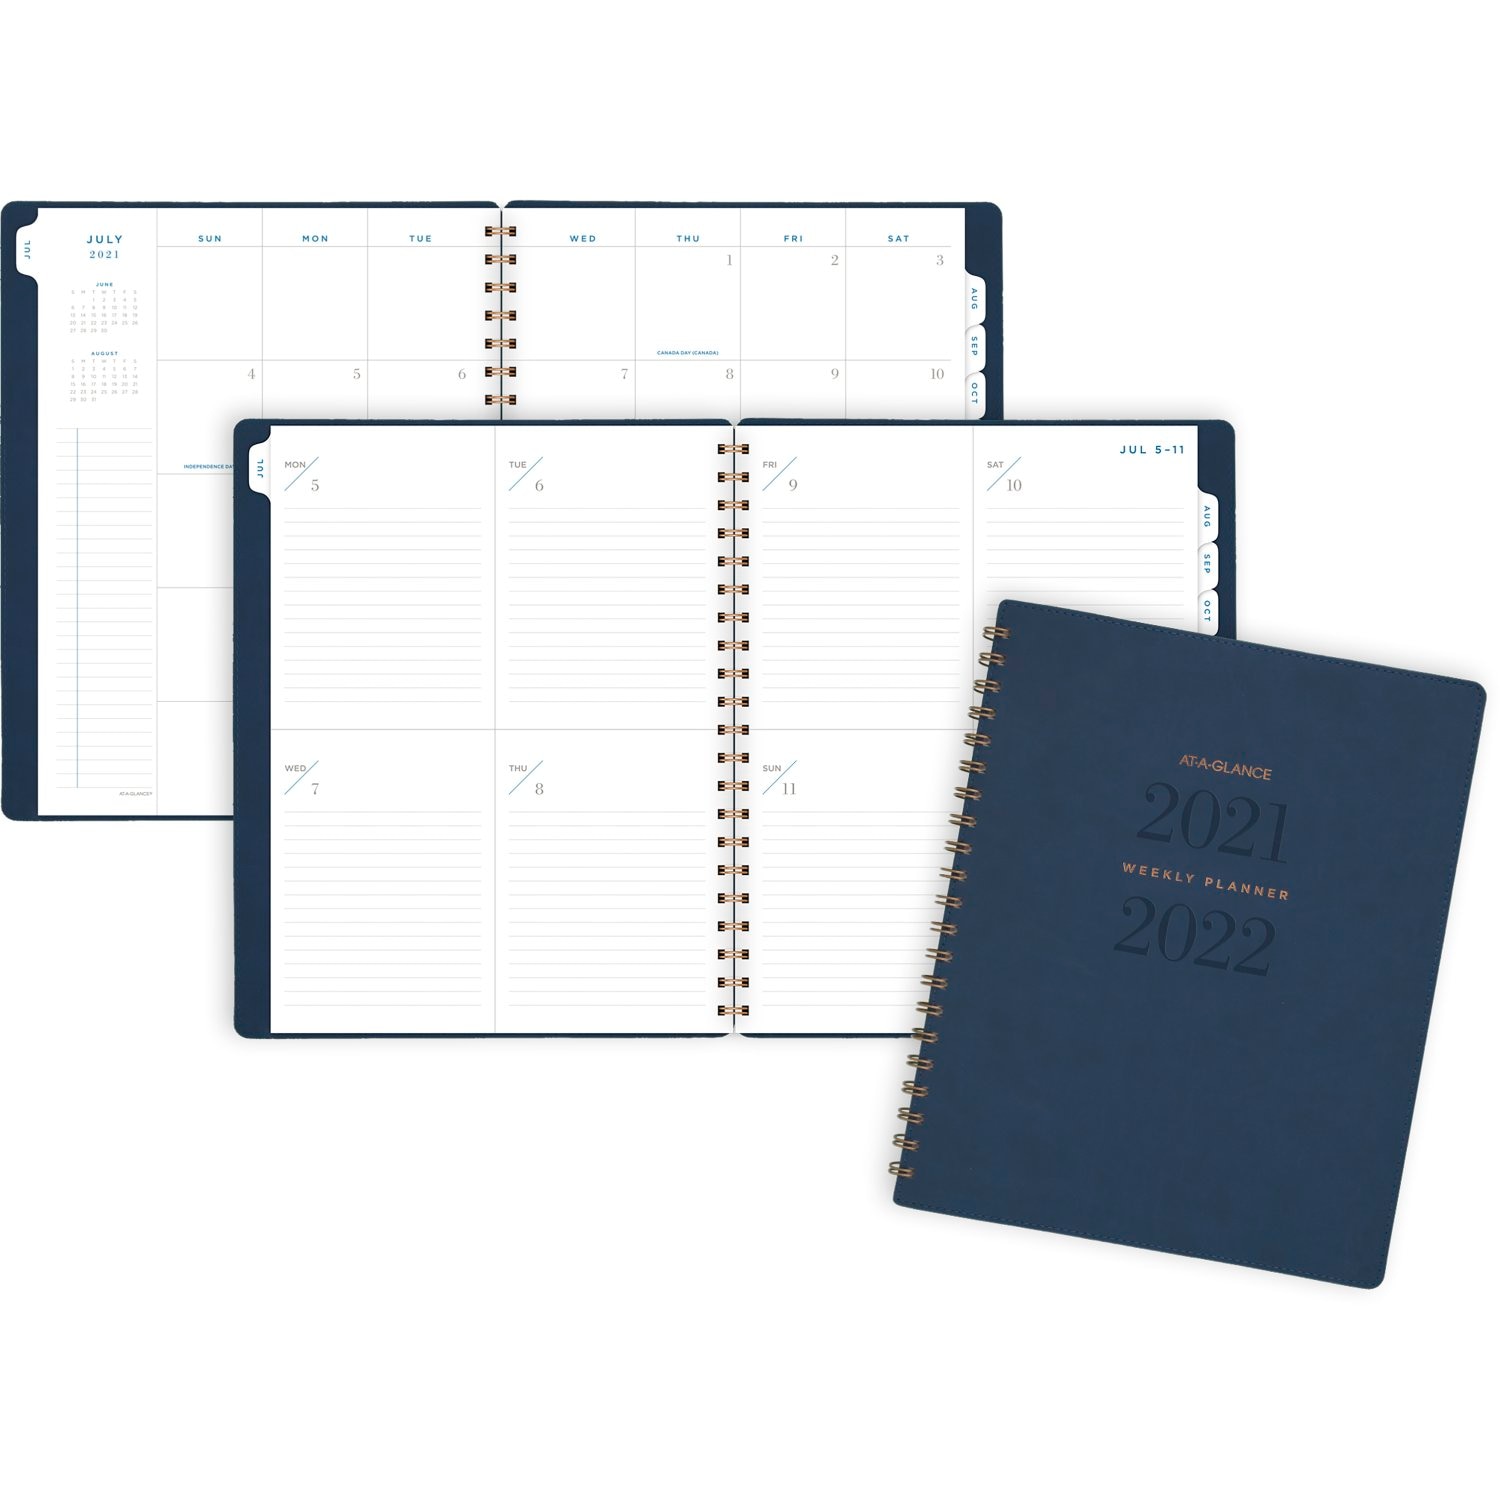 AAG AY 21-22 Navy Planner 8x11